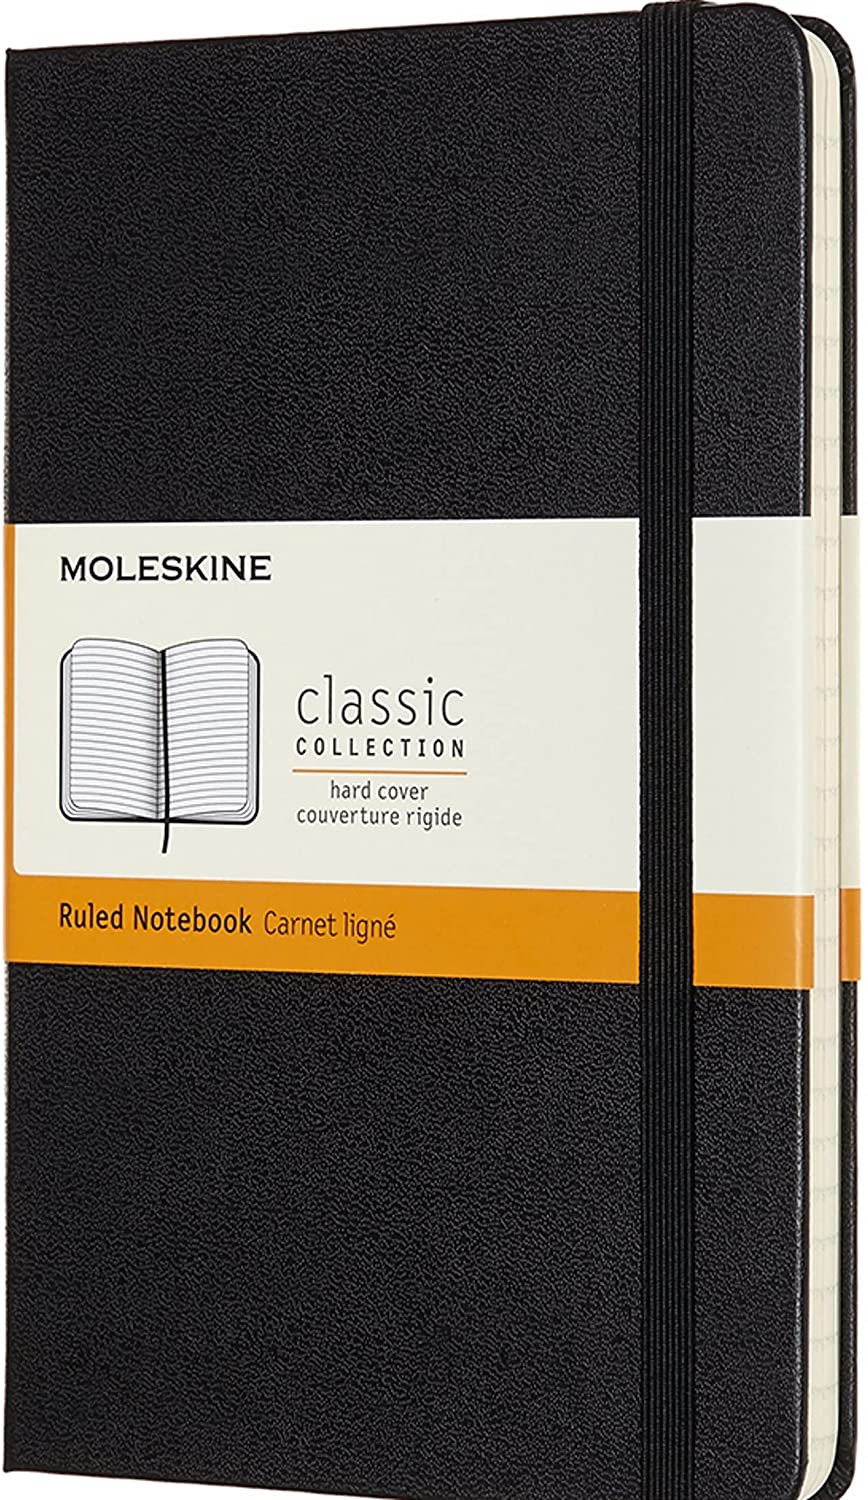 Moleskine Classic Notebook, Hard Cover, Medium (4.5" x 7") Ruled/Lined, Black, 208 Pages